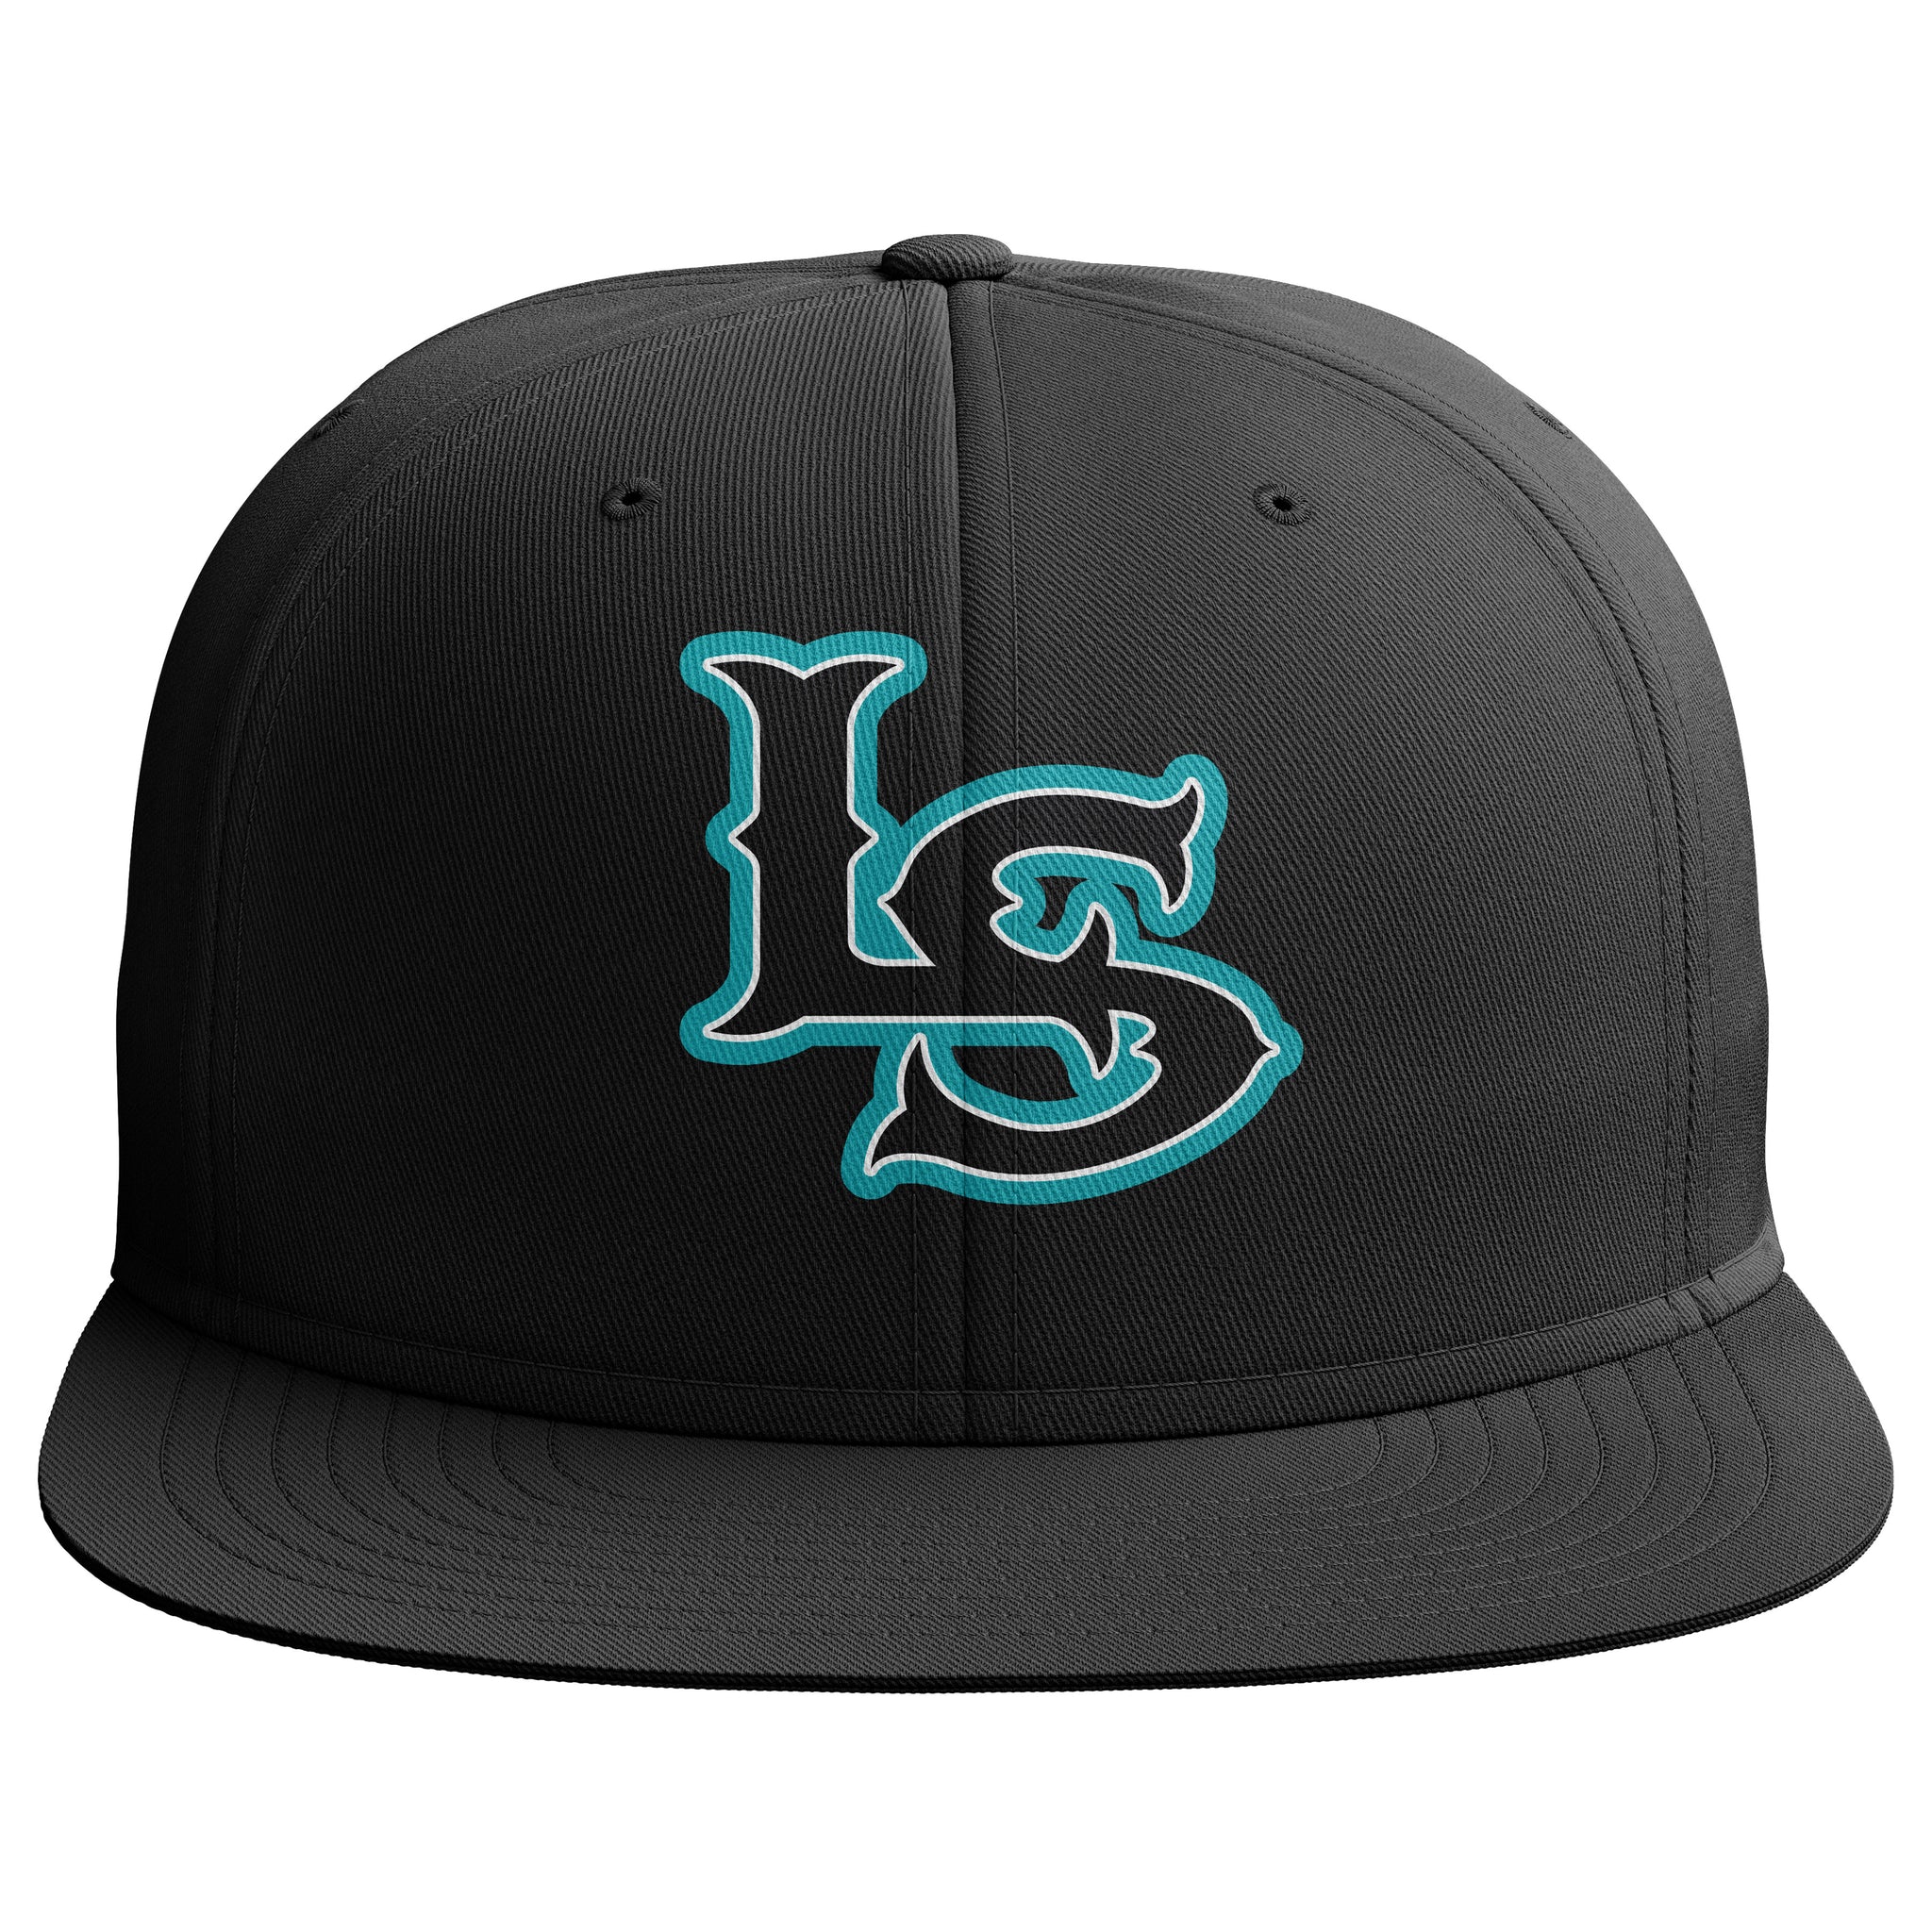 LADY SHARKS 1.0 PTS20 HAT